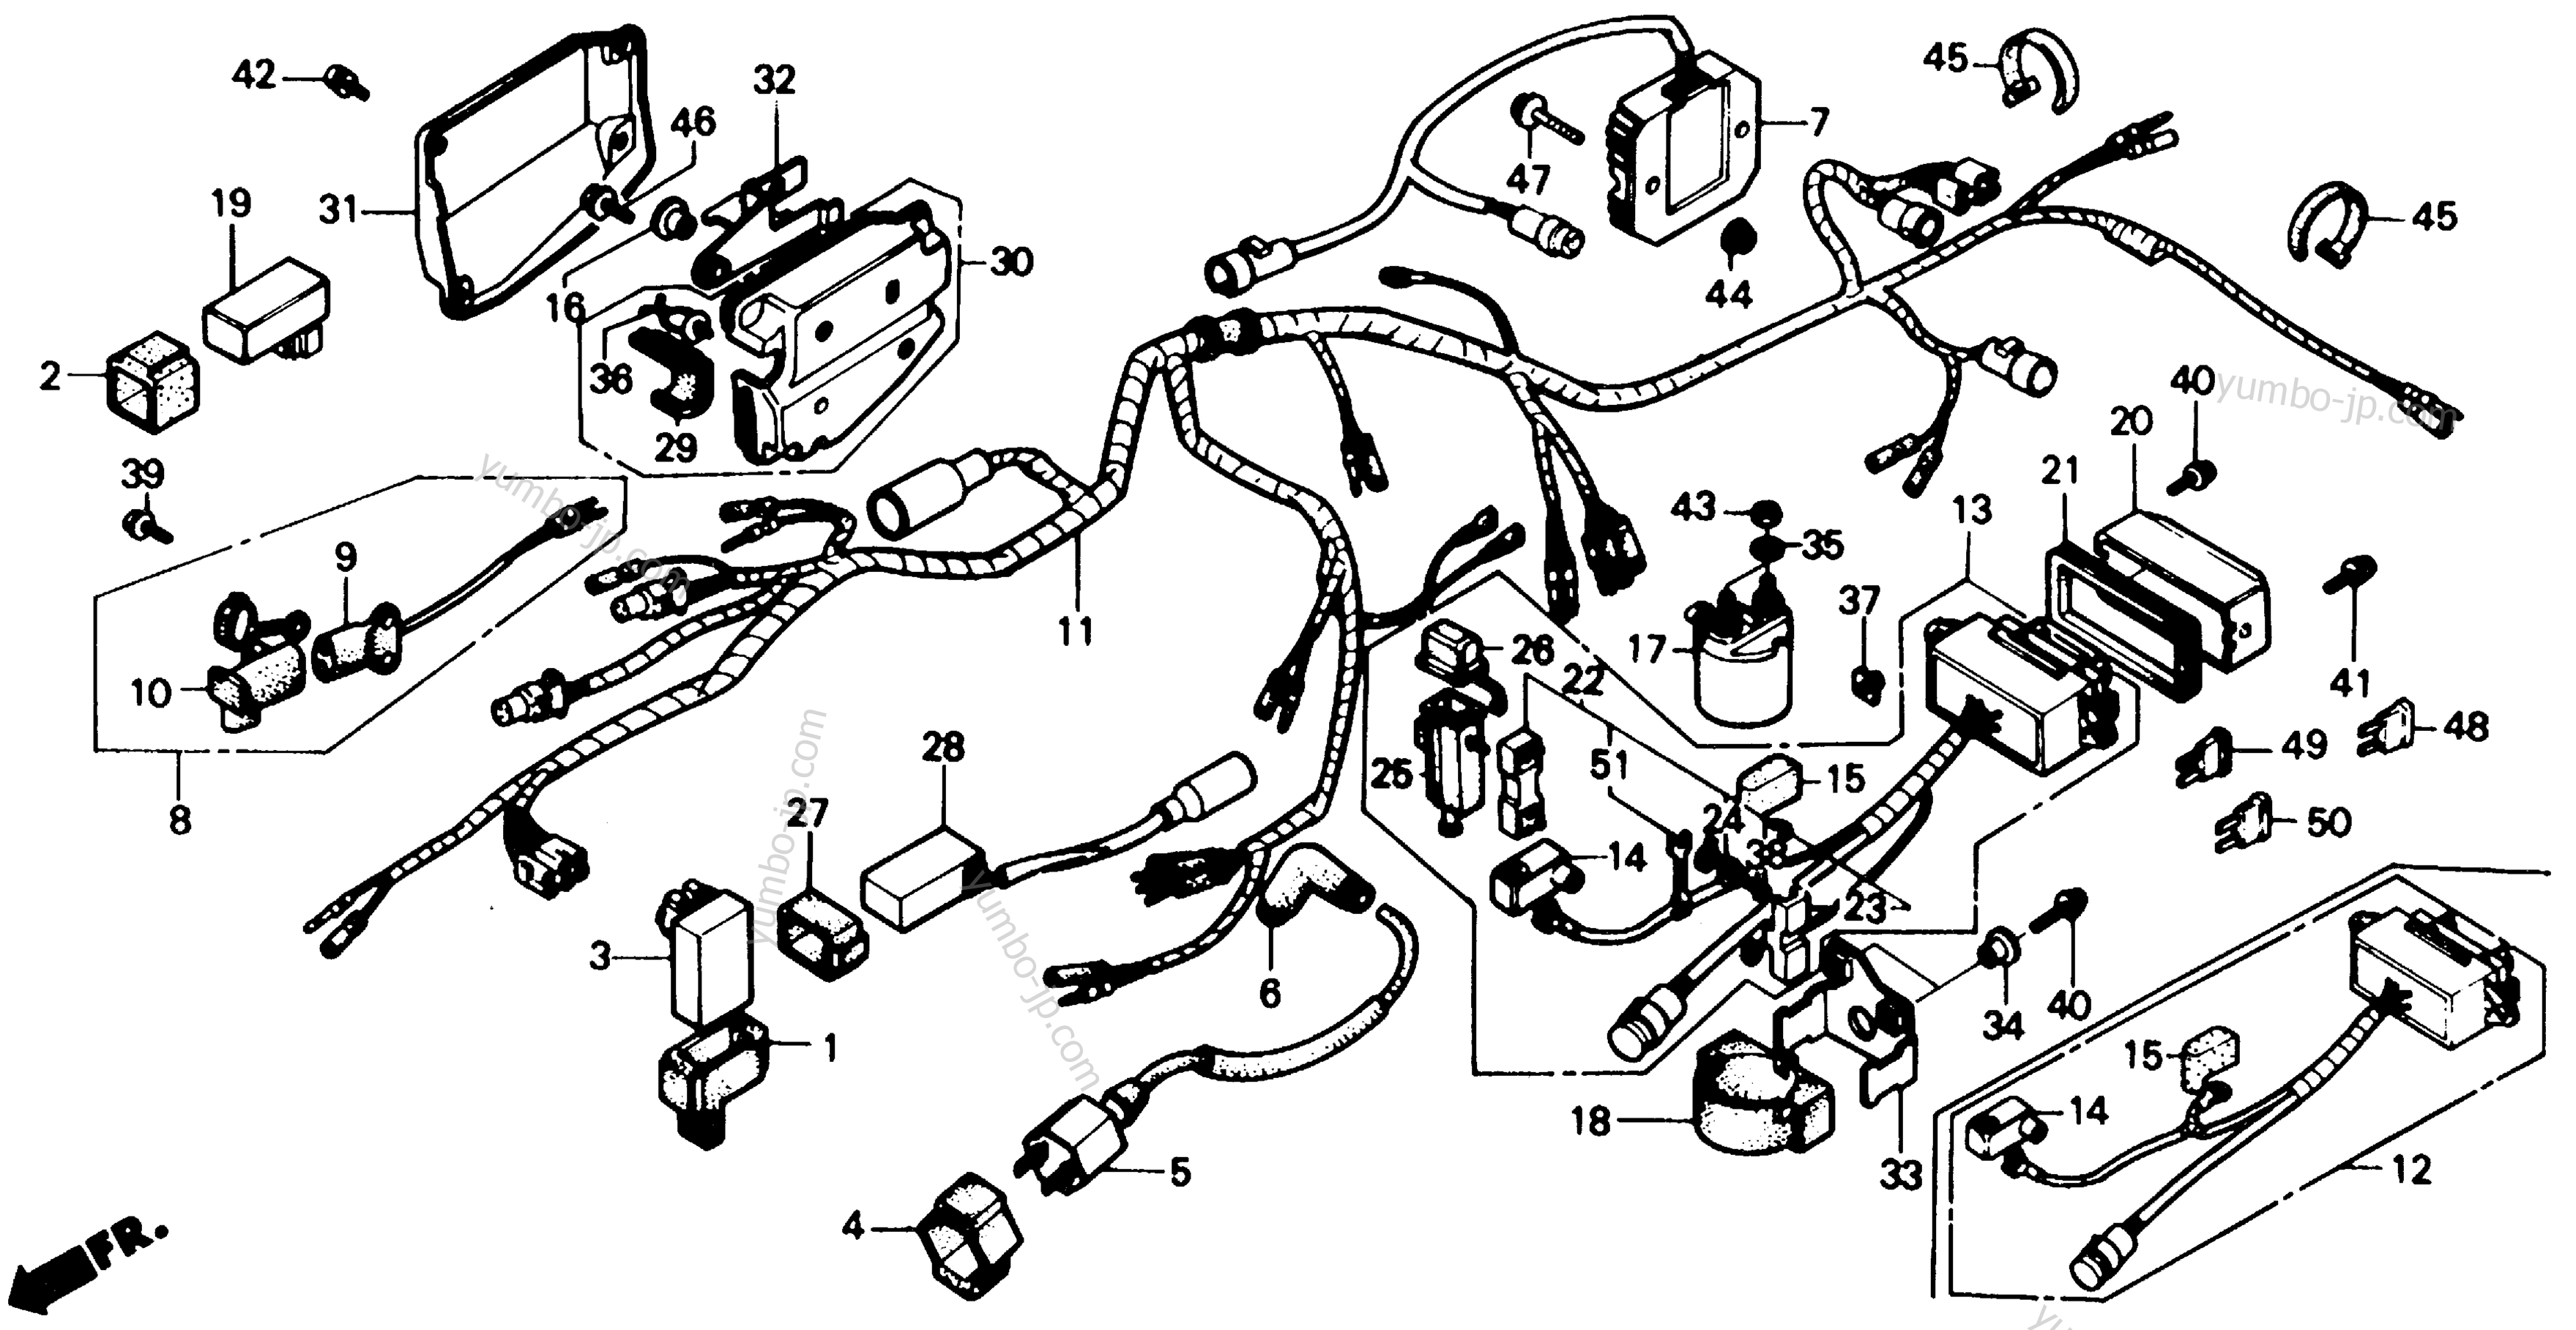 WIRE HARNESS for ATVs HONDA TRX350 A 1987 year